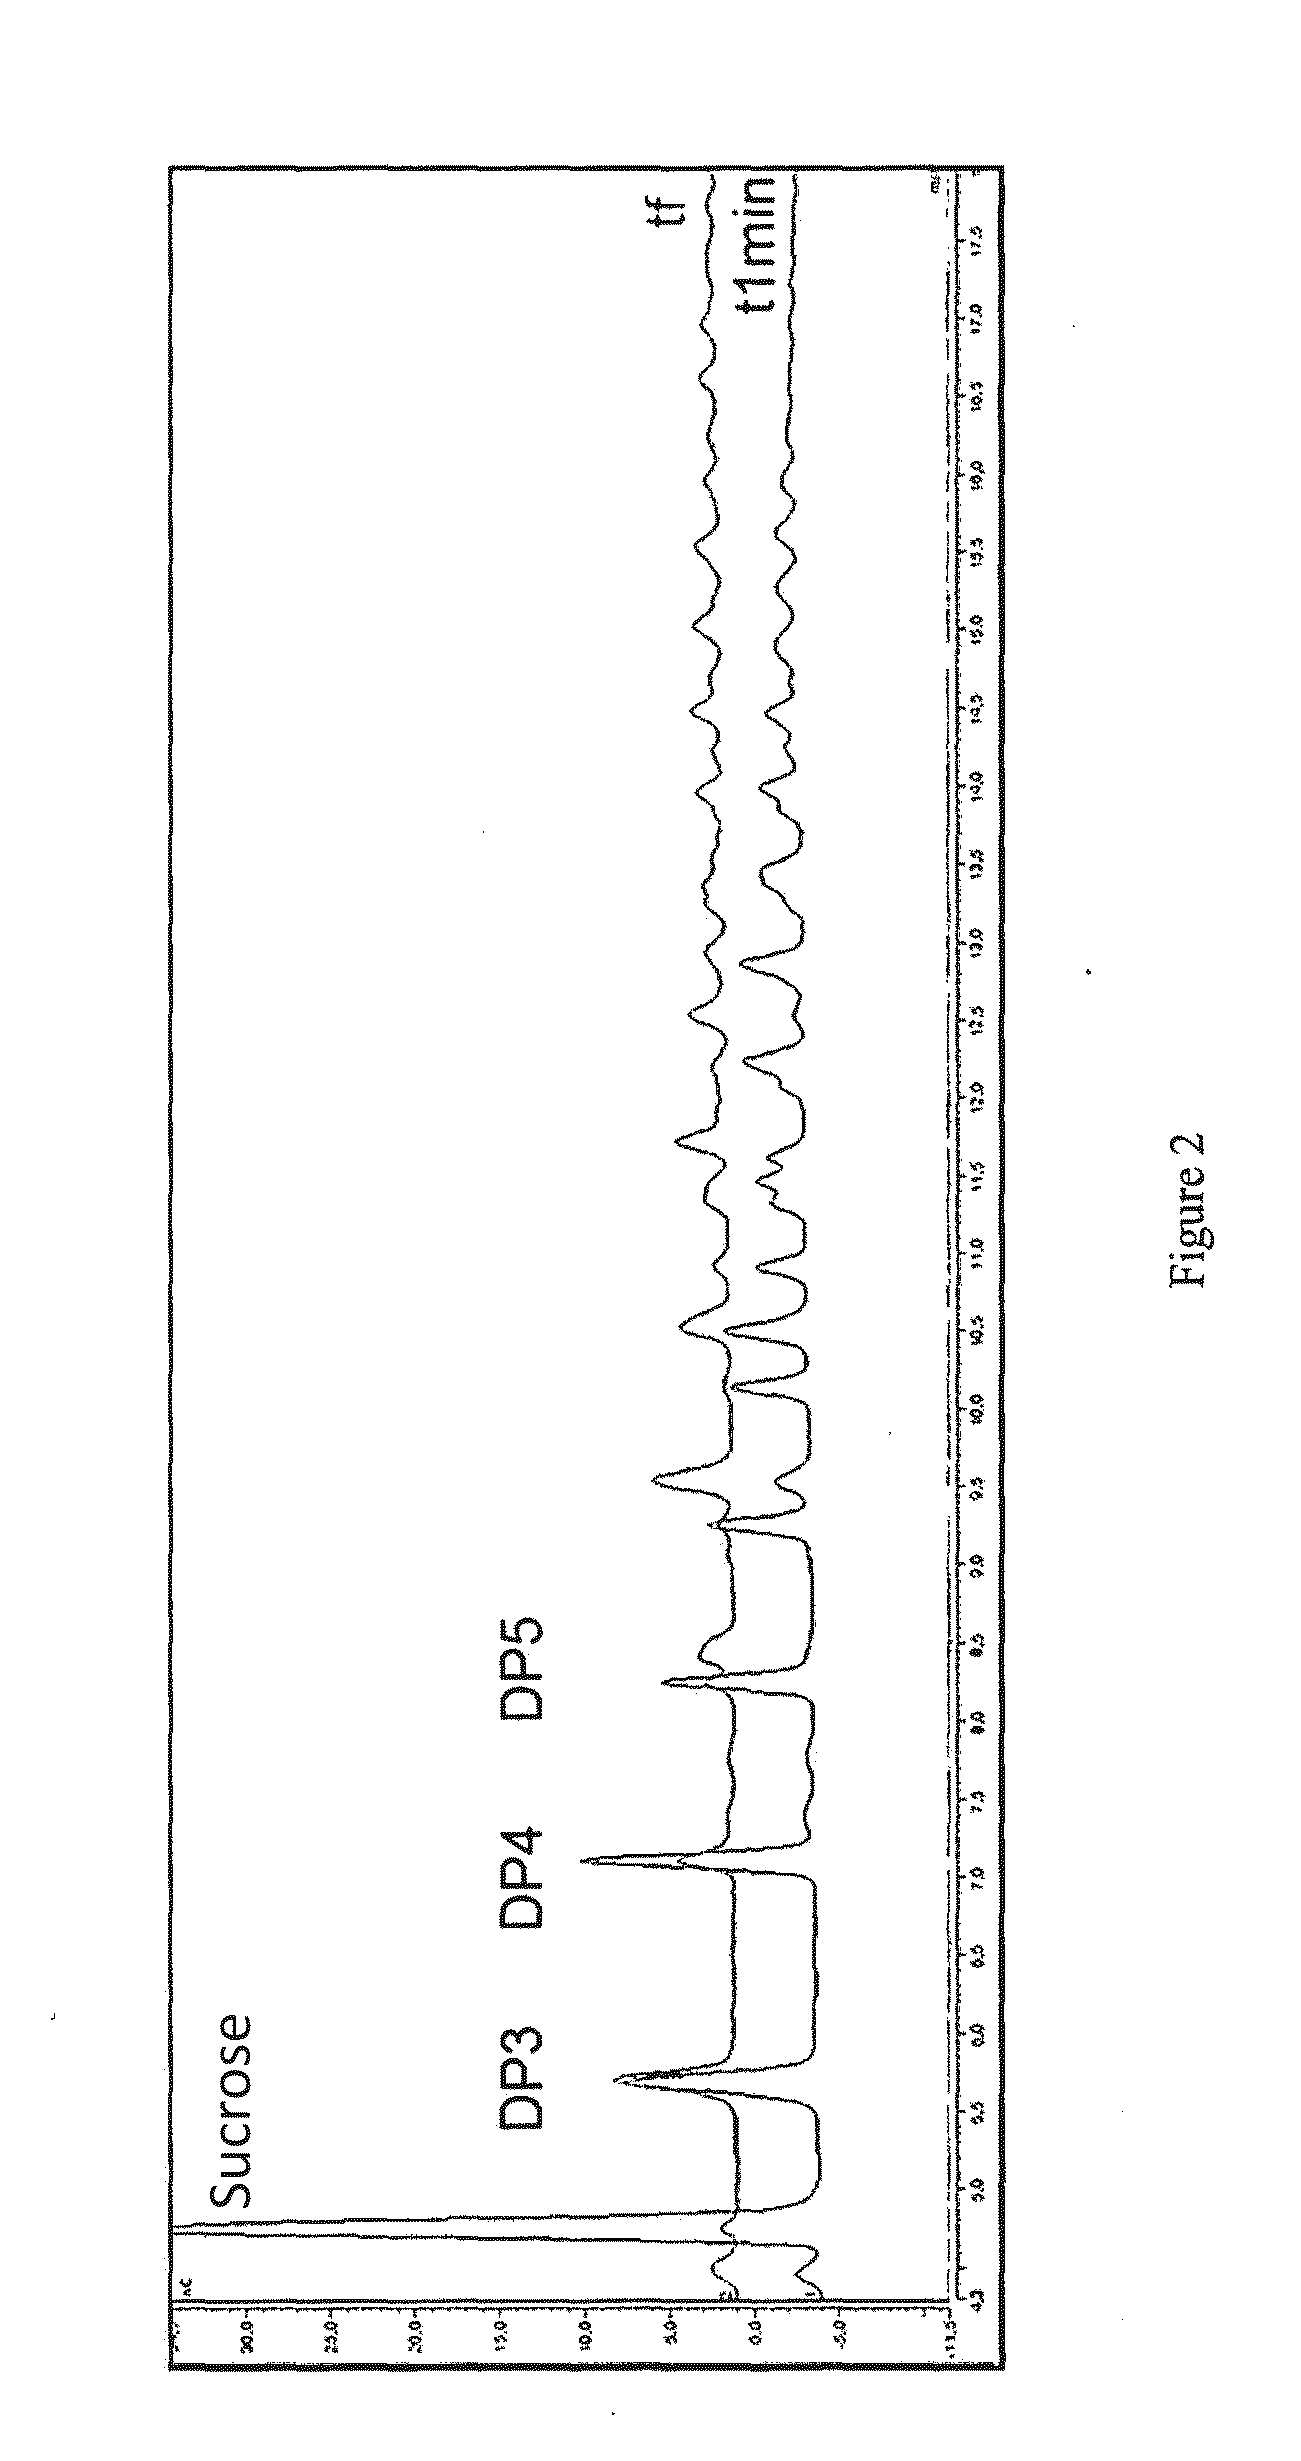 Polypeptide having the ability to form connections of glucosyl units in alpha-1,3 on an acceptor